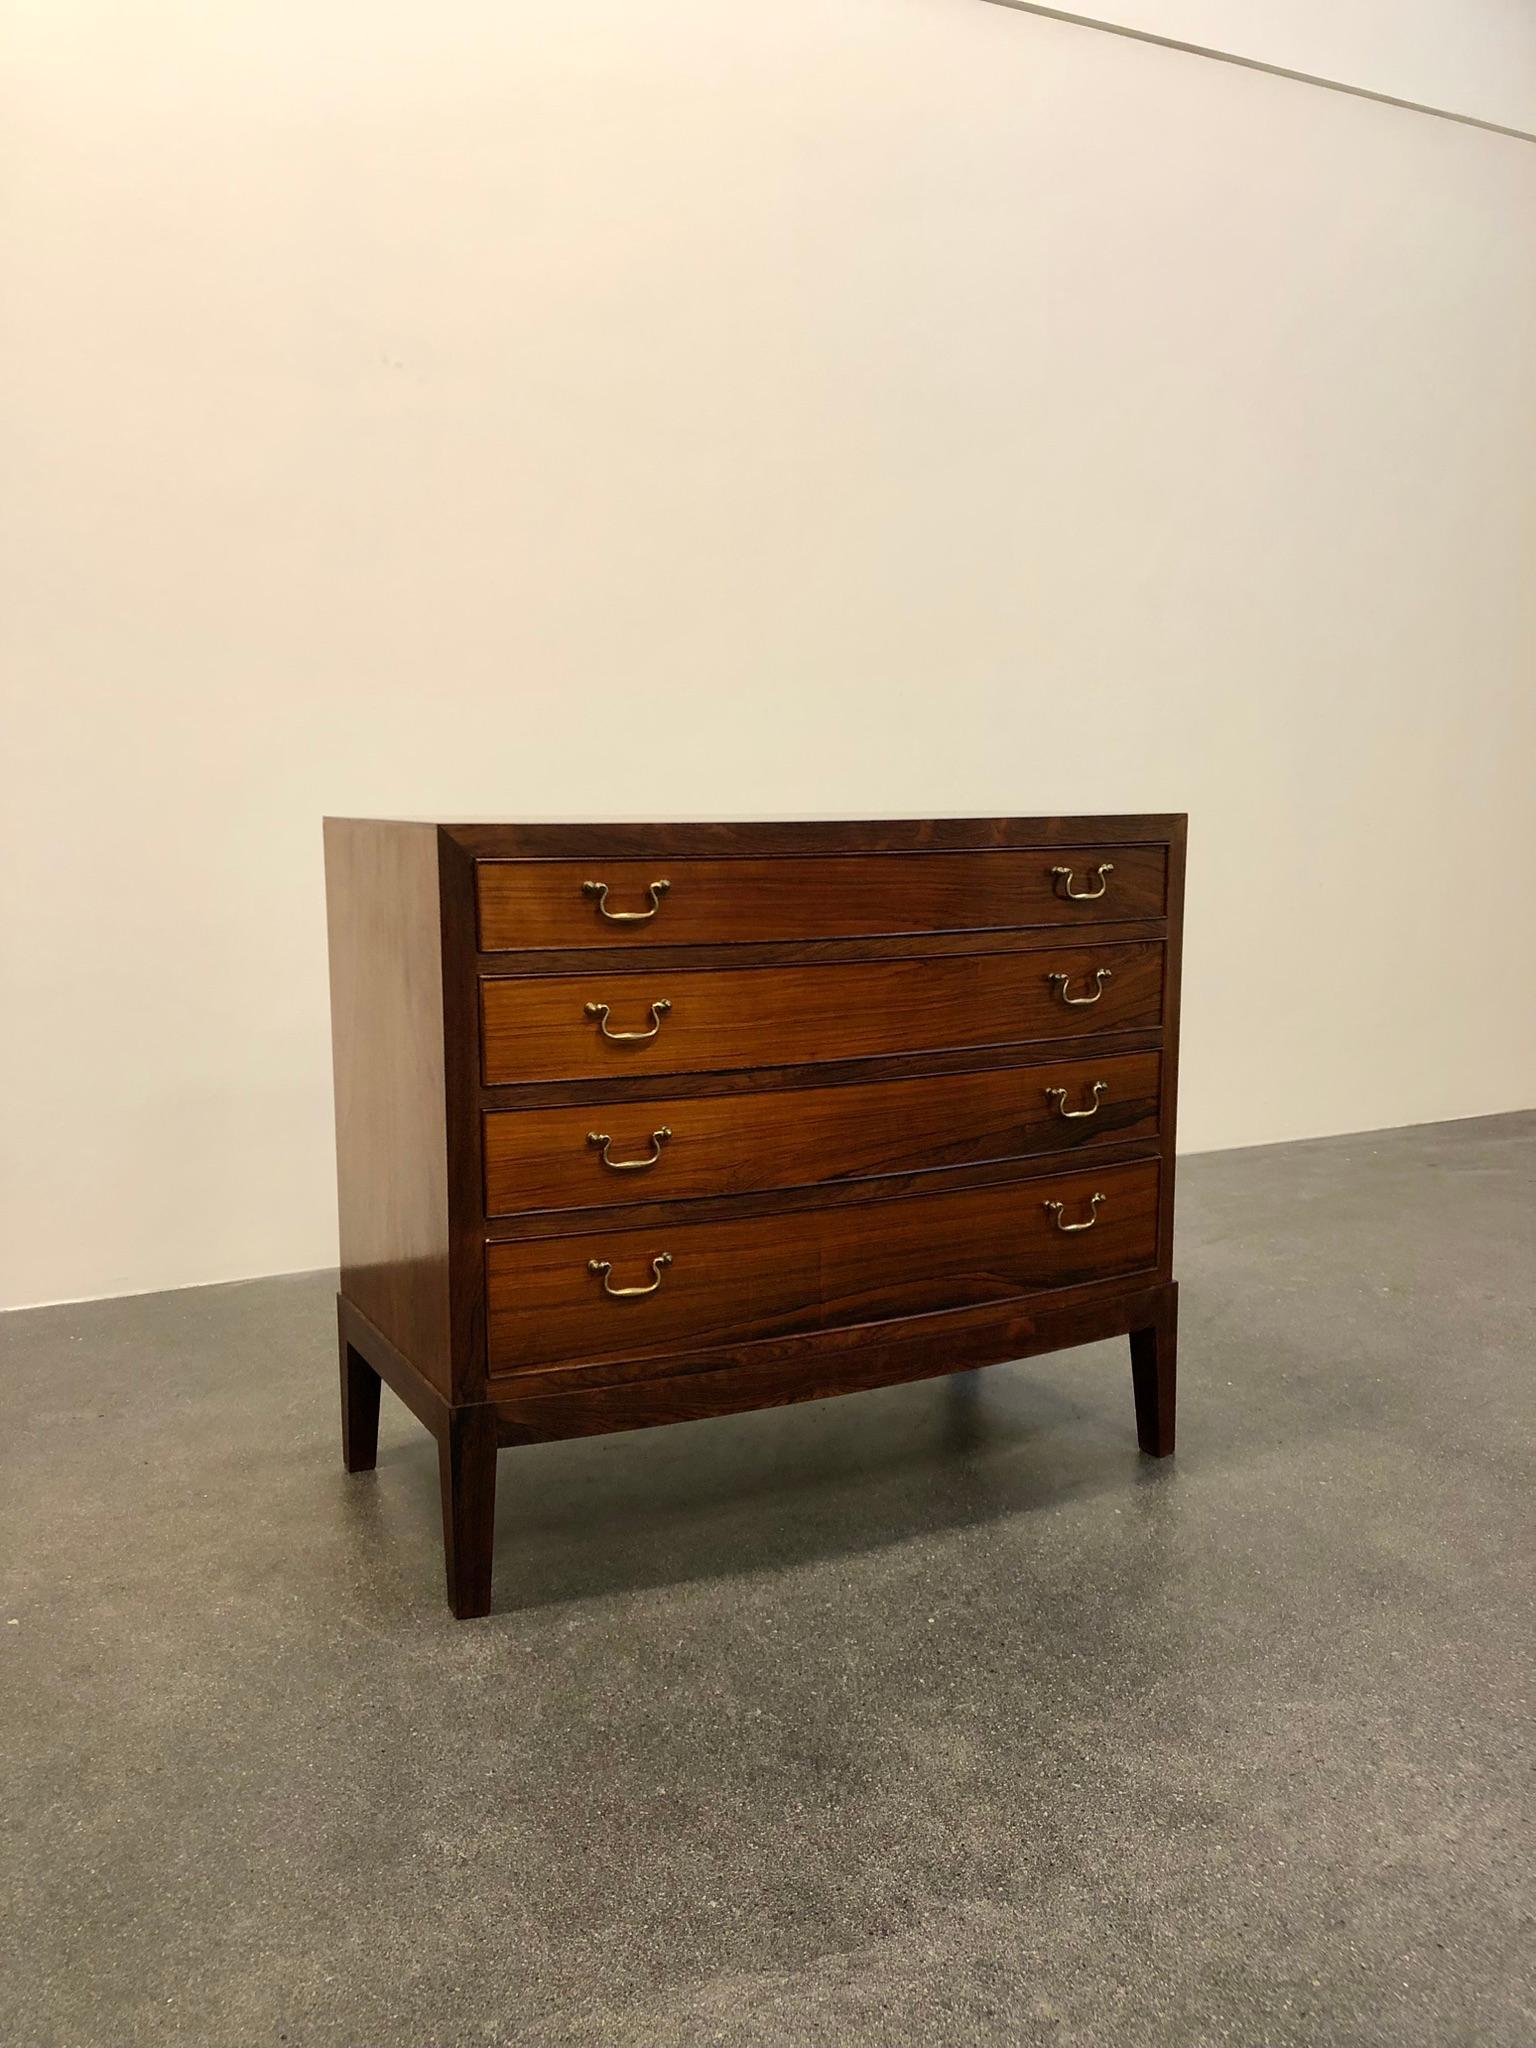 Ole Wanscher chest of drawers in rosewood with bass fittings. Made by master cabinetmaker A. J. Iversen. Chest has four drawers.